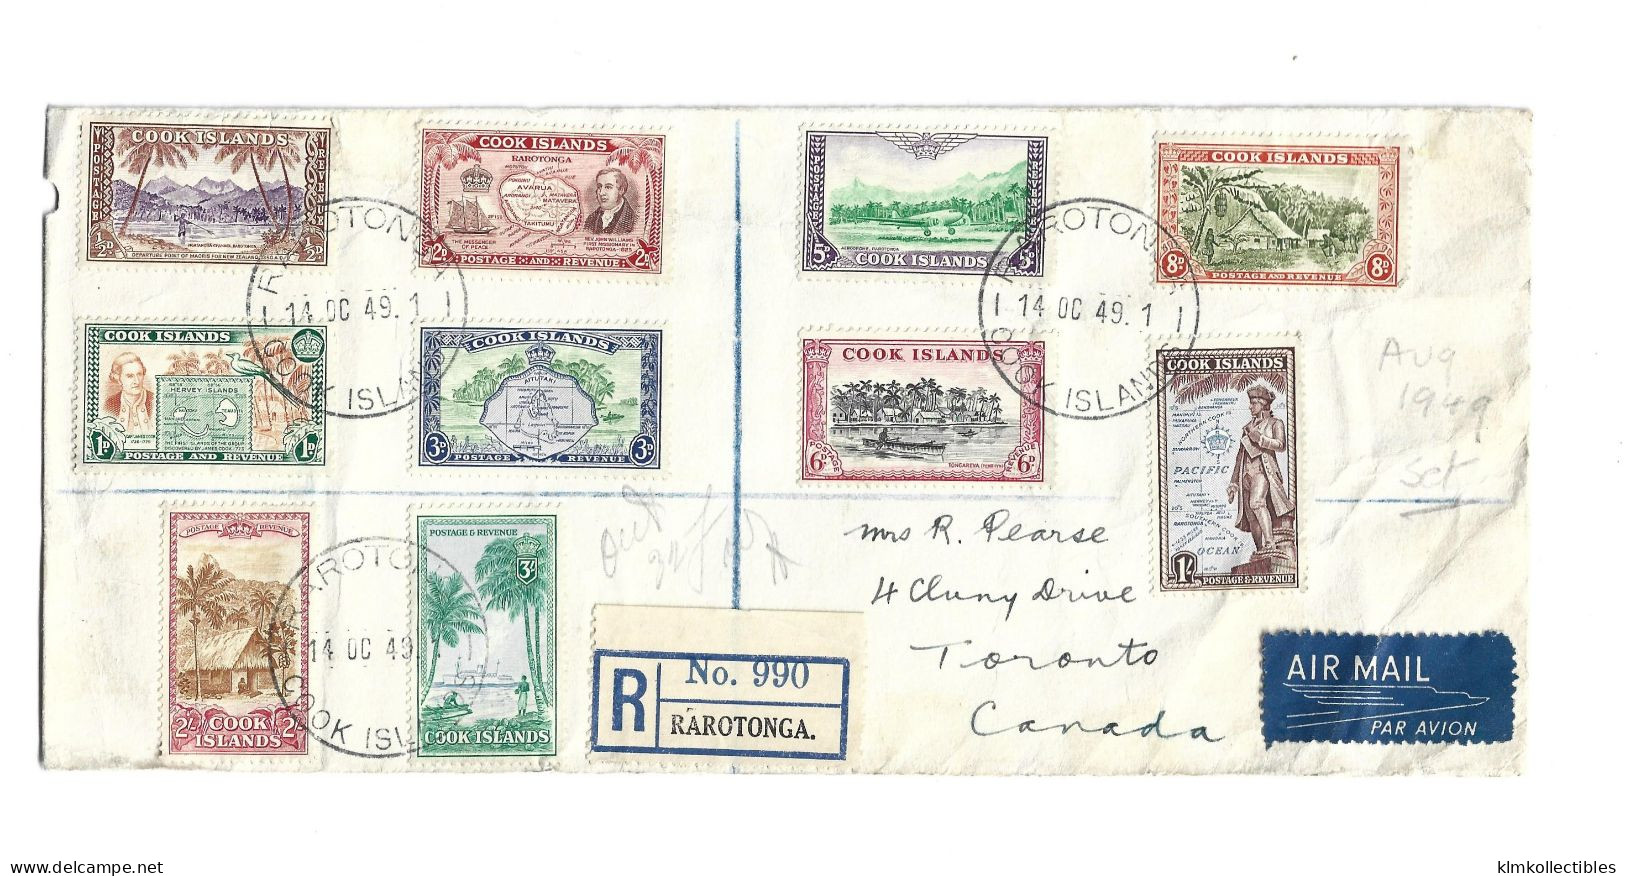 COOK ISLANDS NEW ZEALAND - 1949 FULL SET ON COVER FDC - REAL CIRCULATION TO CANADA - Cook Islands